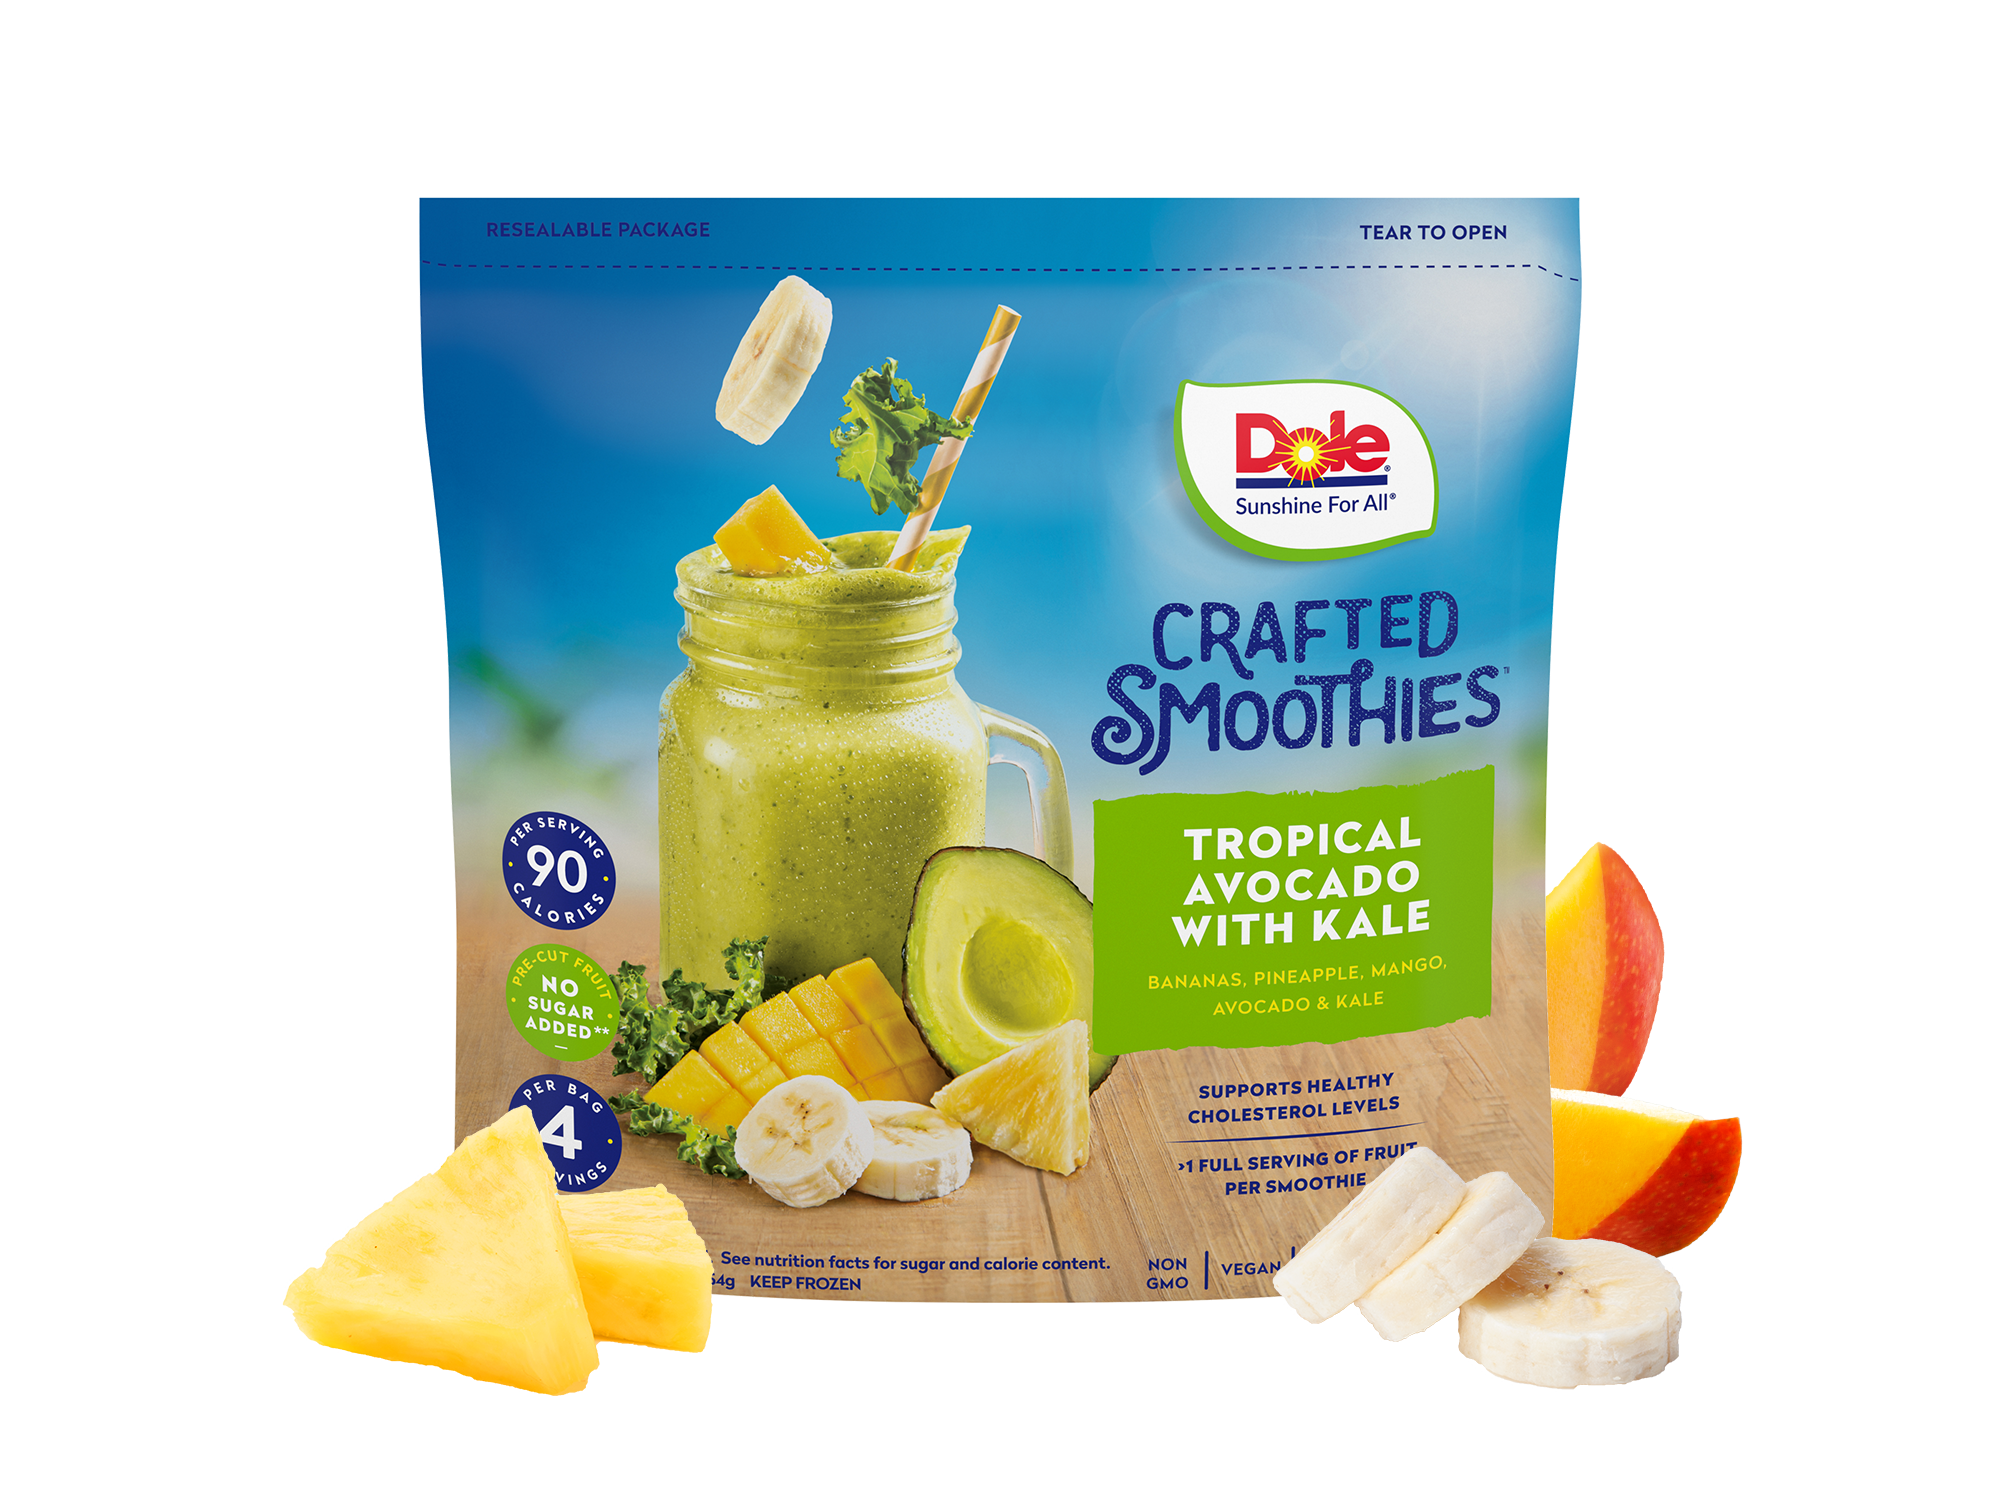 Have you been blending the Fruits & Greens Smoothie Blend? : r